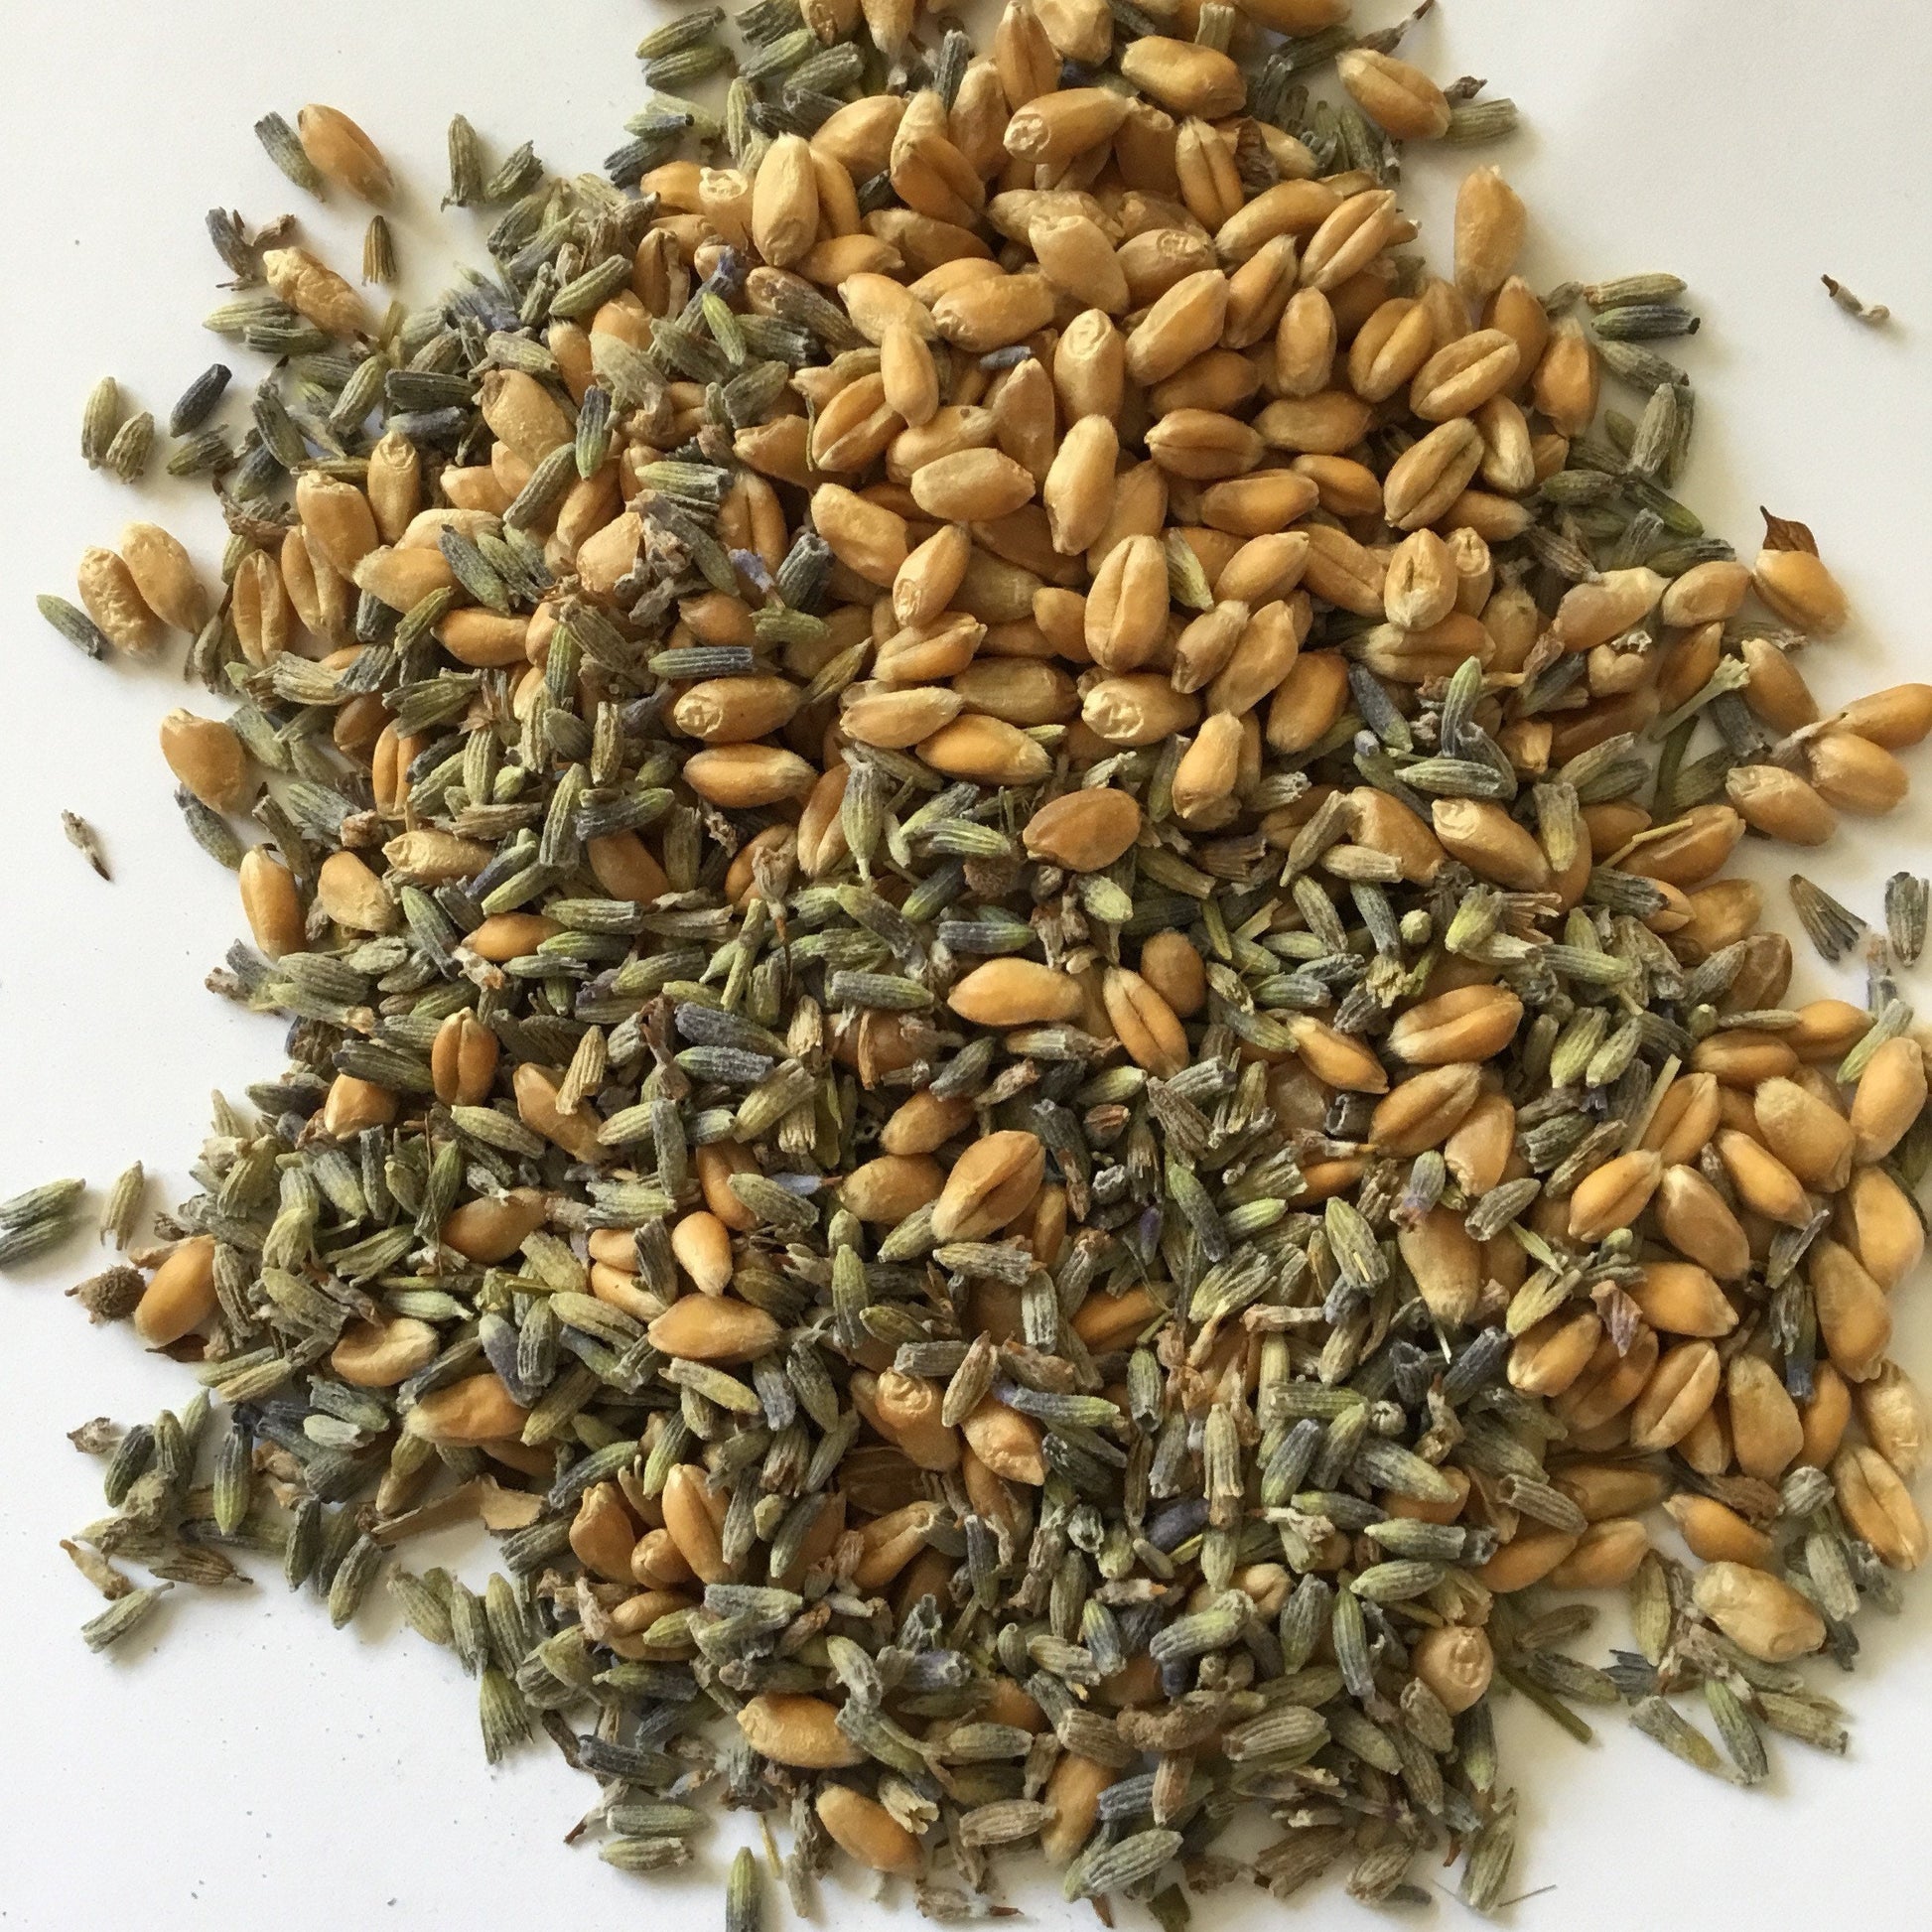 English lavender and somerset whole wheat filler for handmade wheat bags from wheatbagheaven